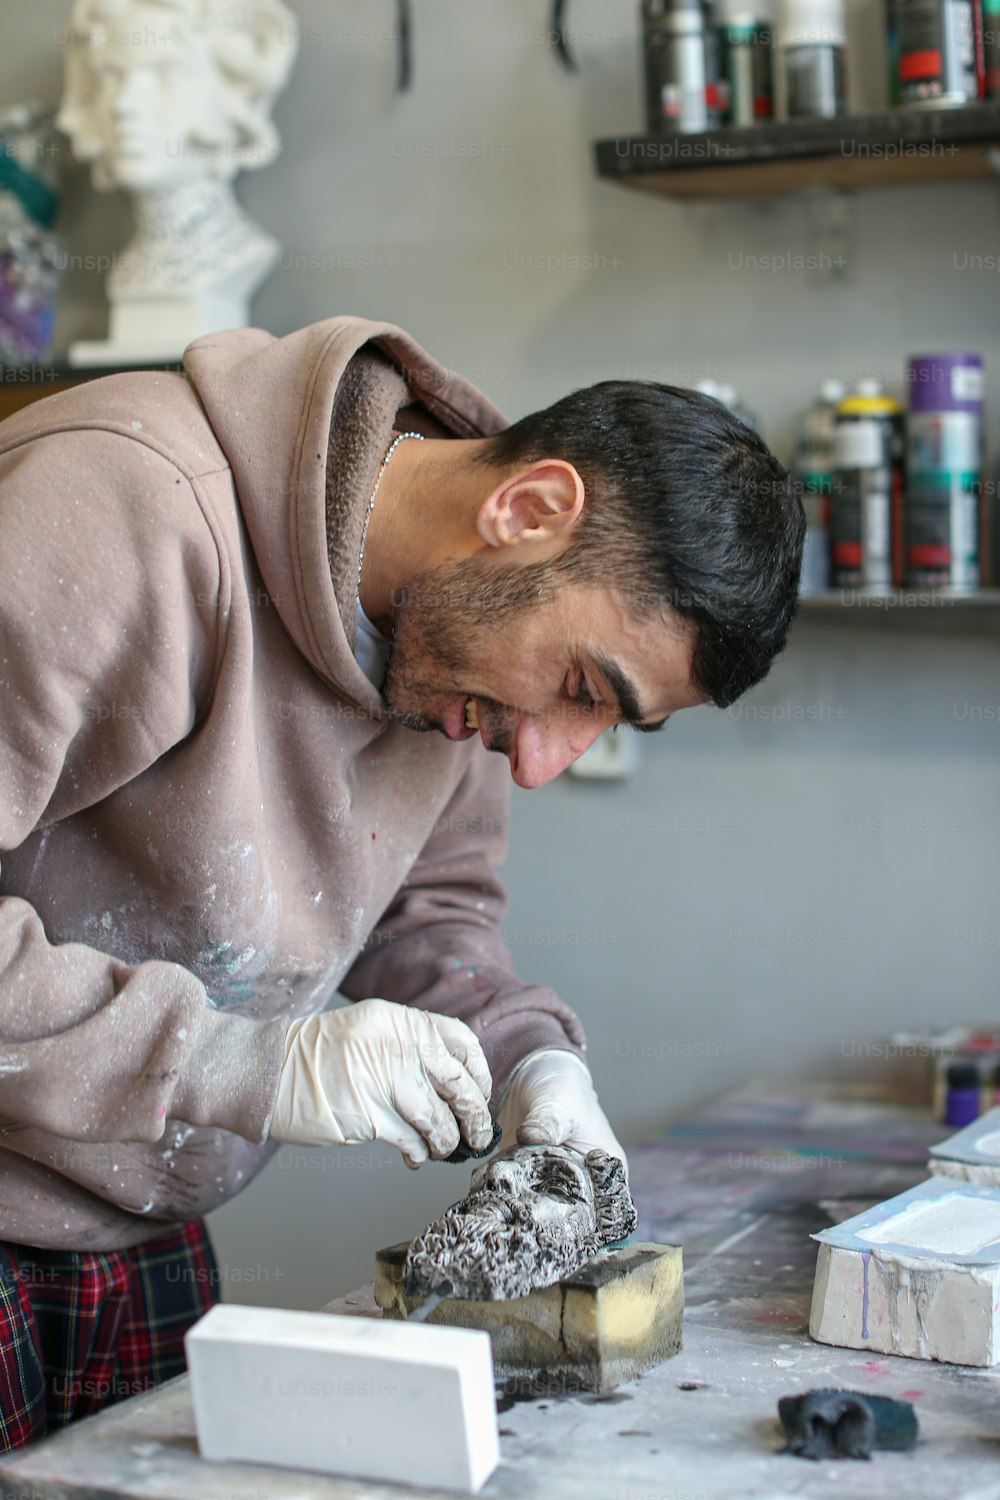 a man working on a sculpture in a studio